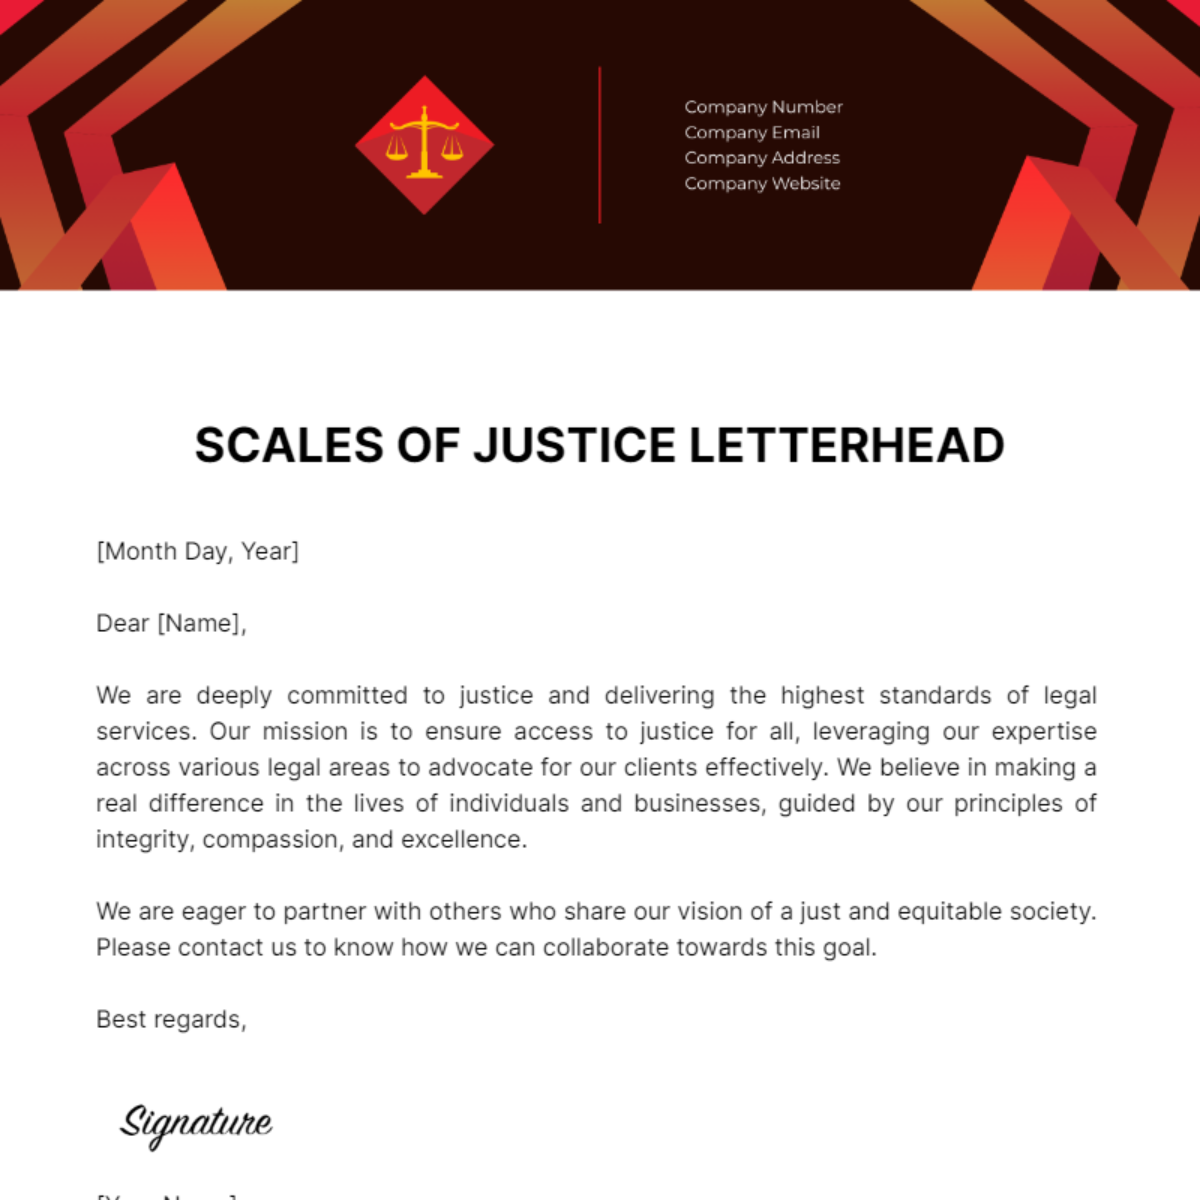 Scales of Justice Letterhead Template